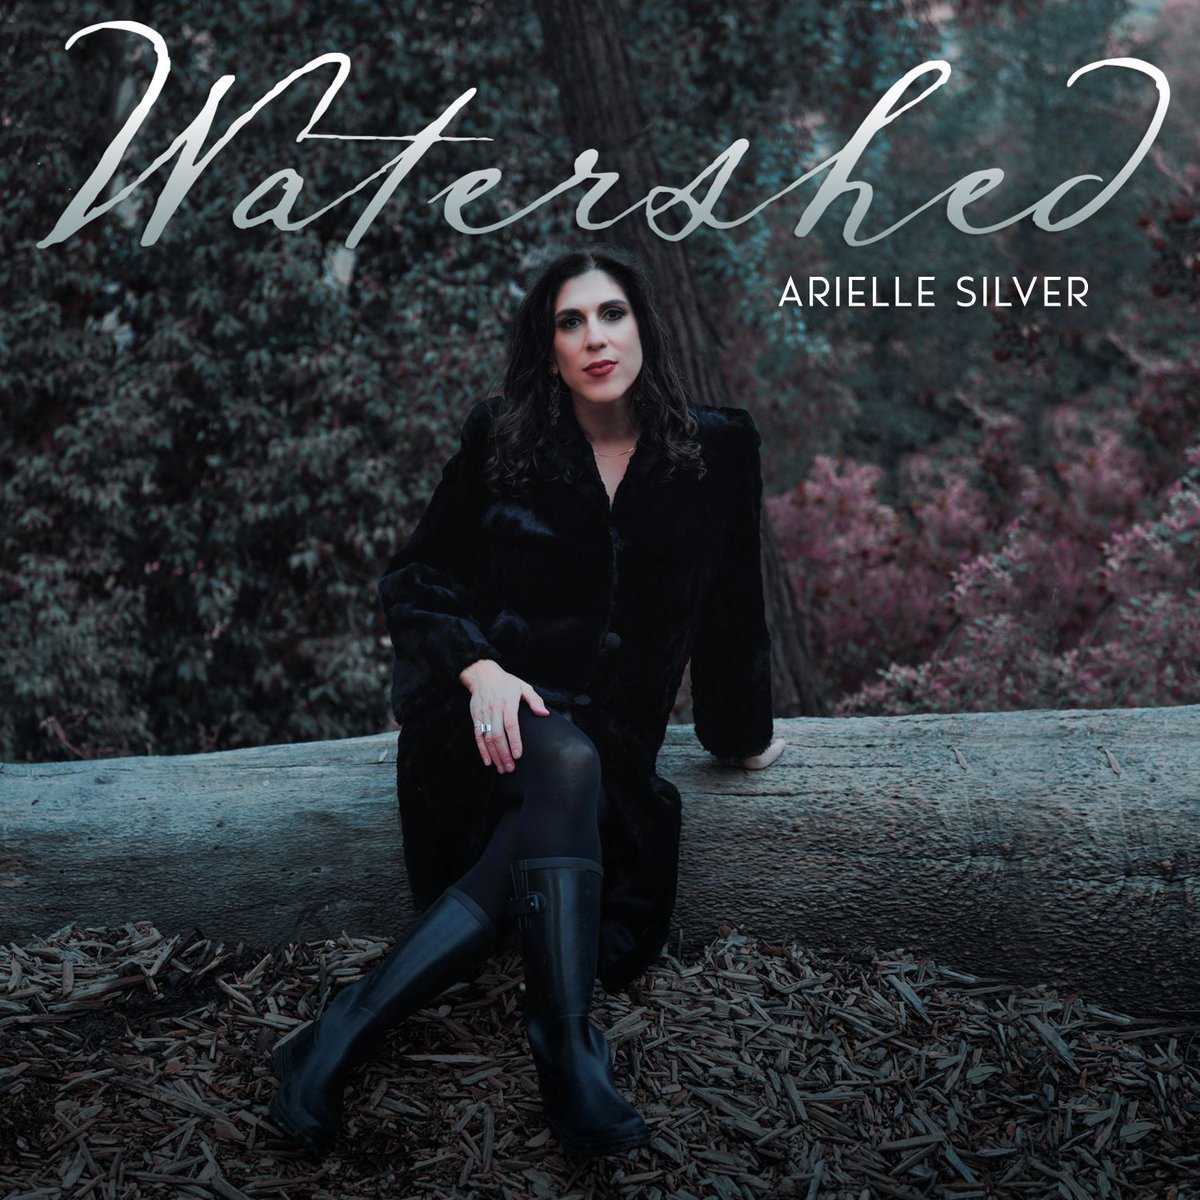 In the sun-soaked heart of California, Arielle Silver emerges on Watershed as a masterful storyteller, blending the soul of Americana roots with influences drawn equally from Laurel Canyon and Greenwich Village. @relsilver @SidewaysMedia newreleasesnow.com/album/arielle-…